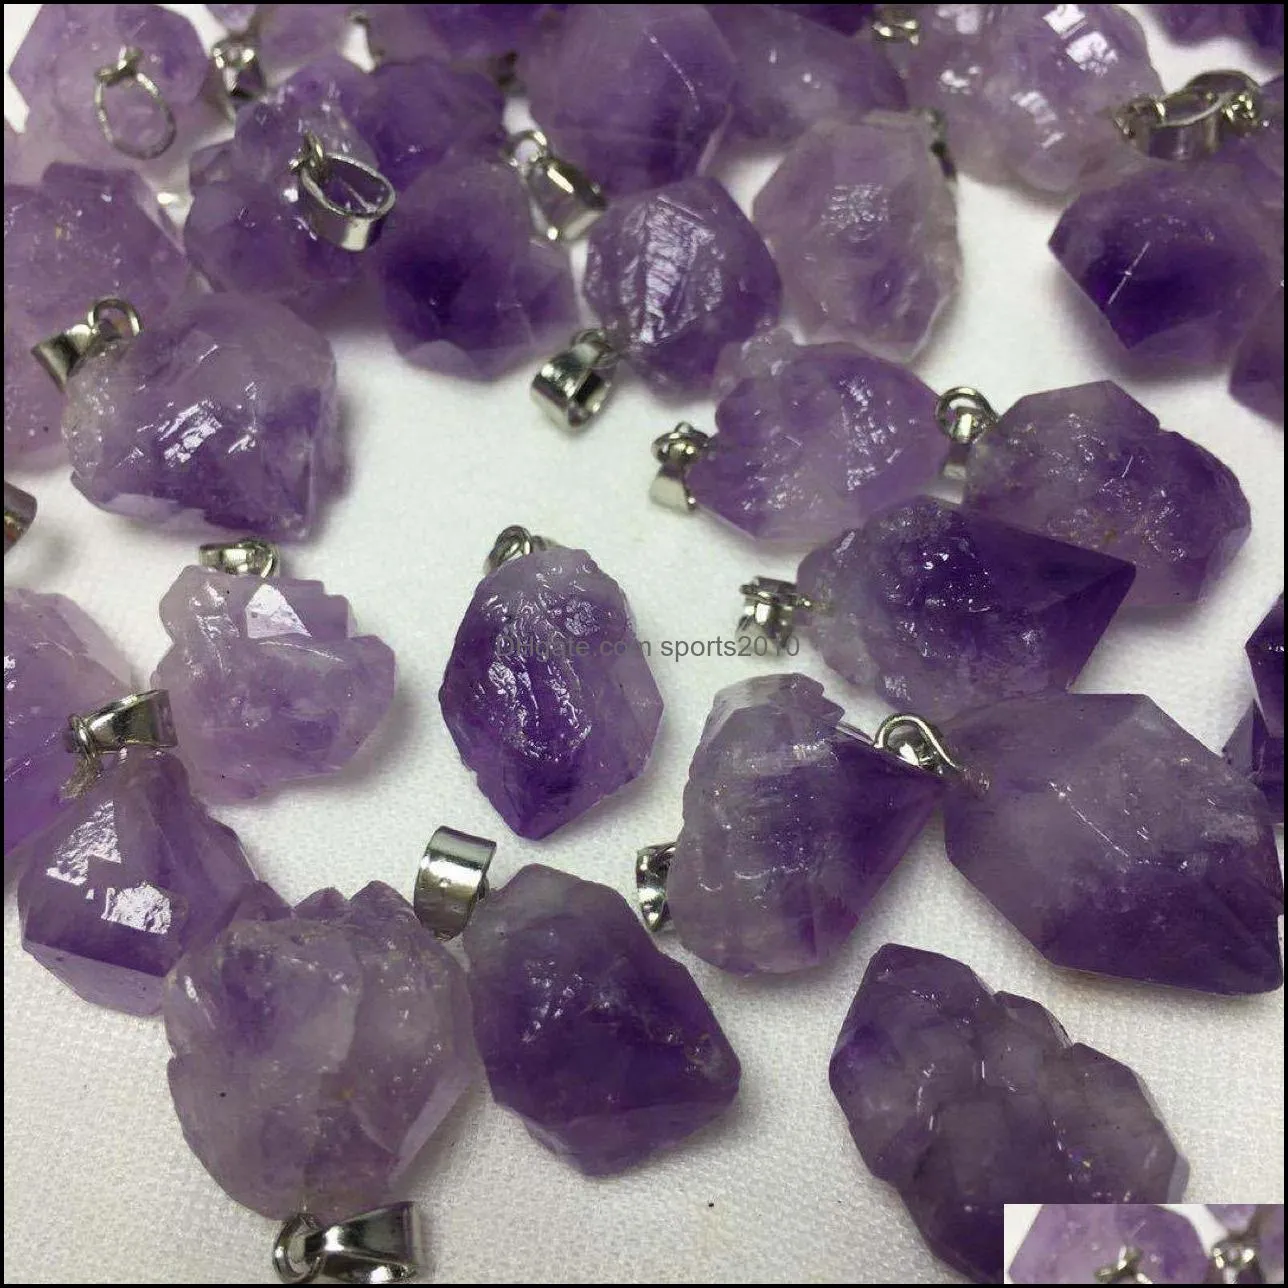 natural stone amethyst crystal irregular shape charms pendant for jewelry making bul sports2010